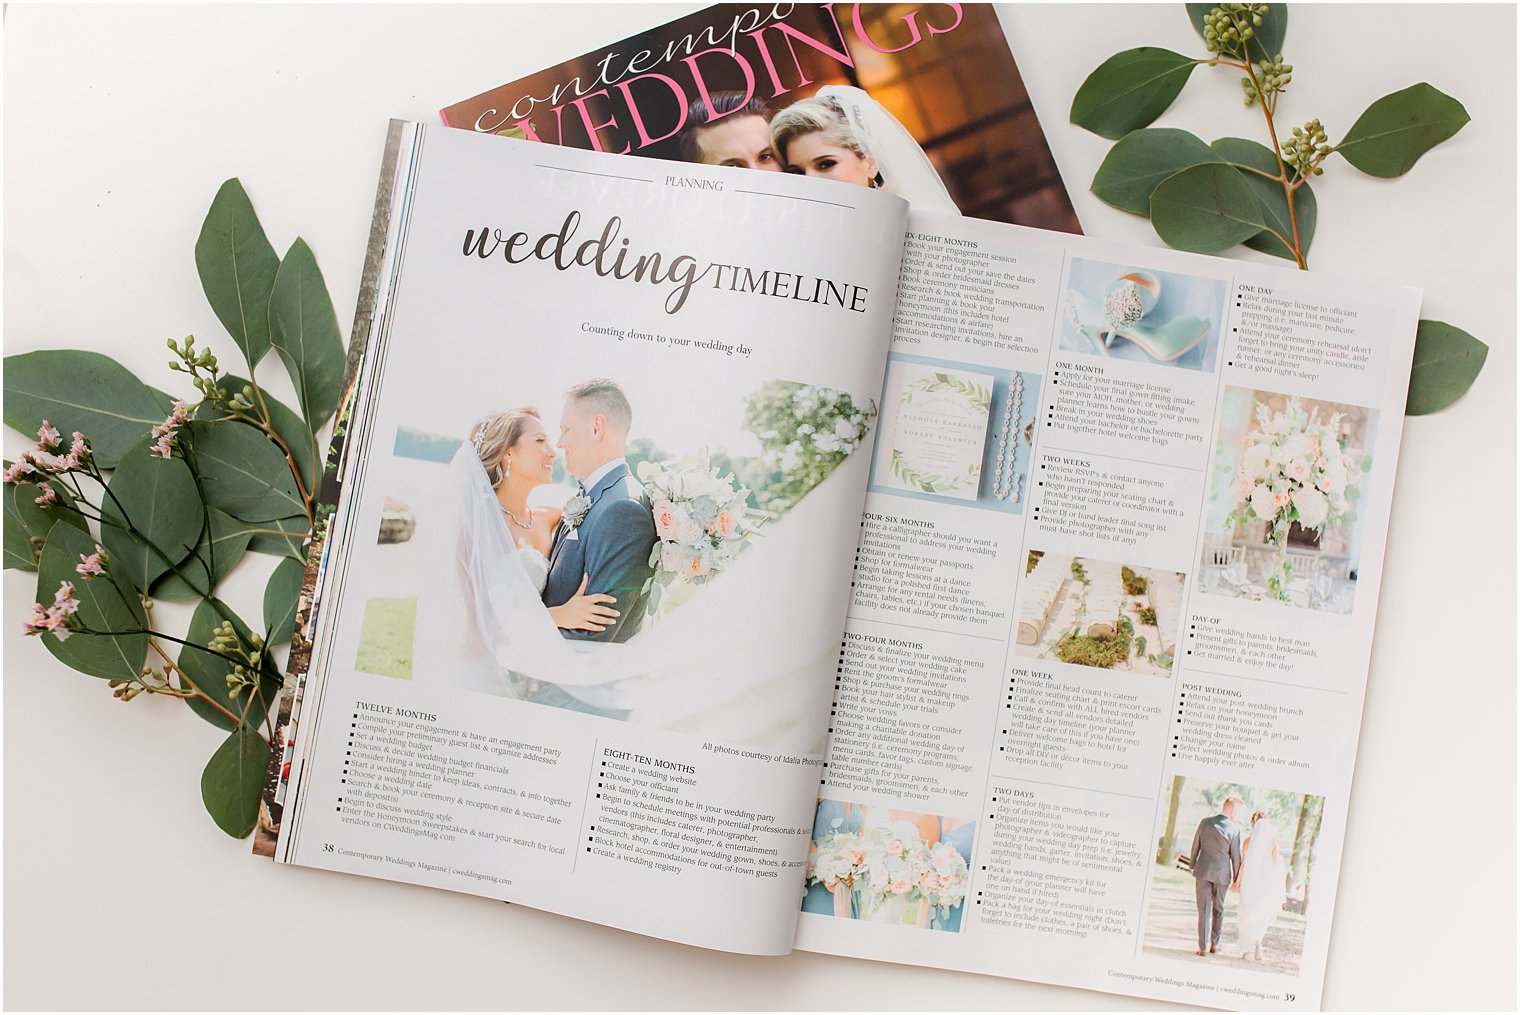 Published in Contemporary Weddings Magazine